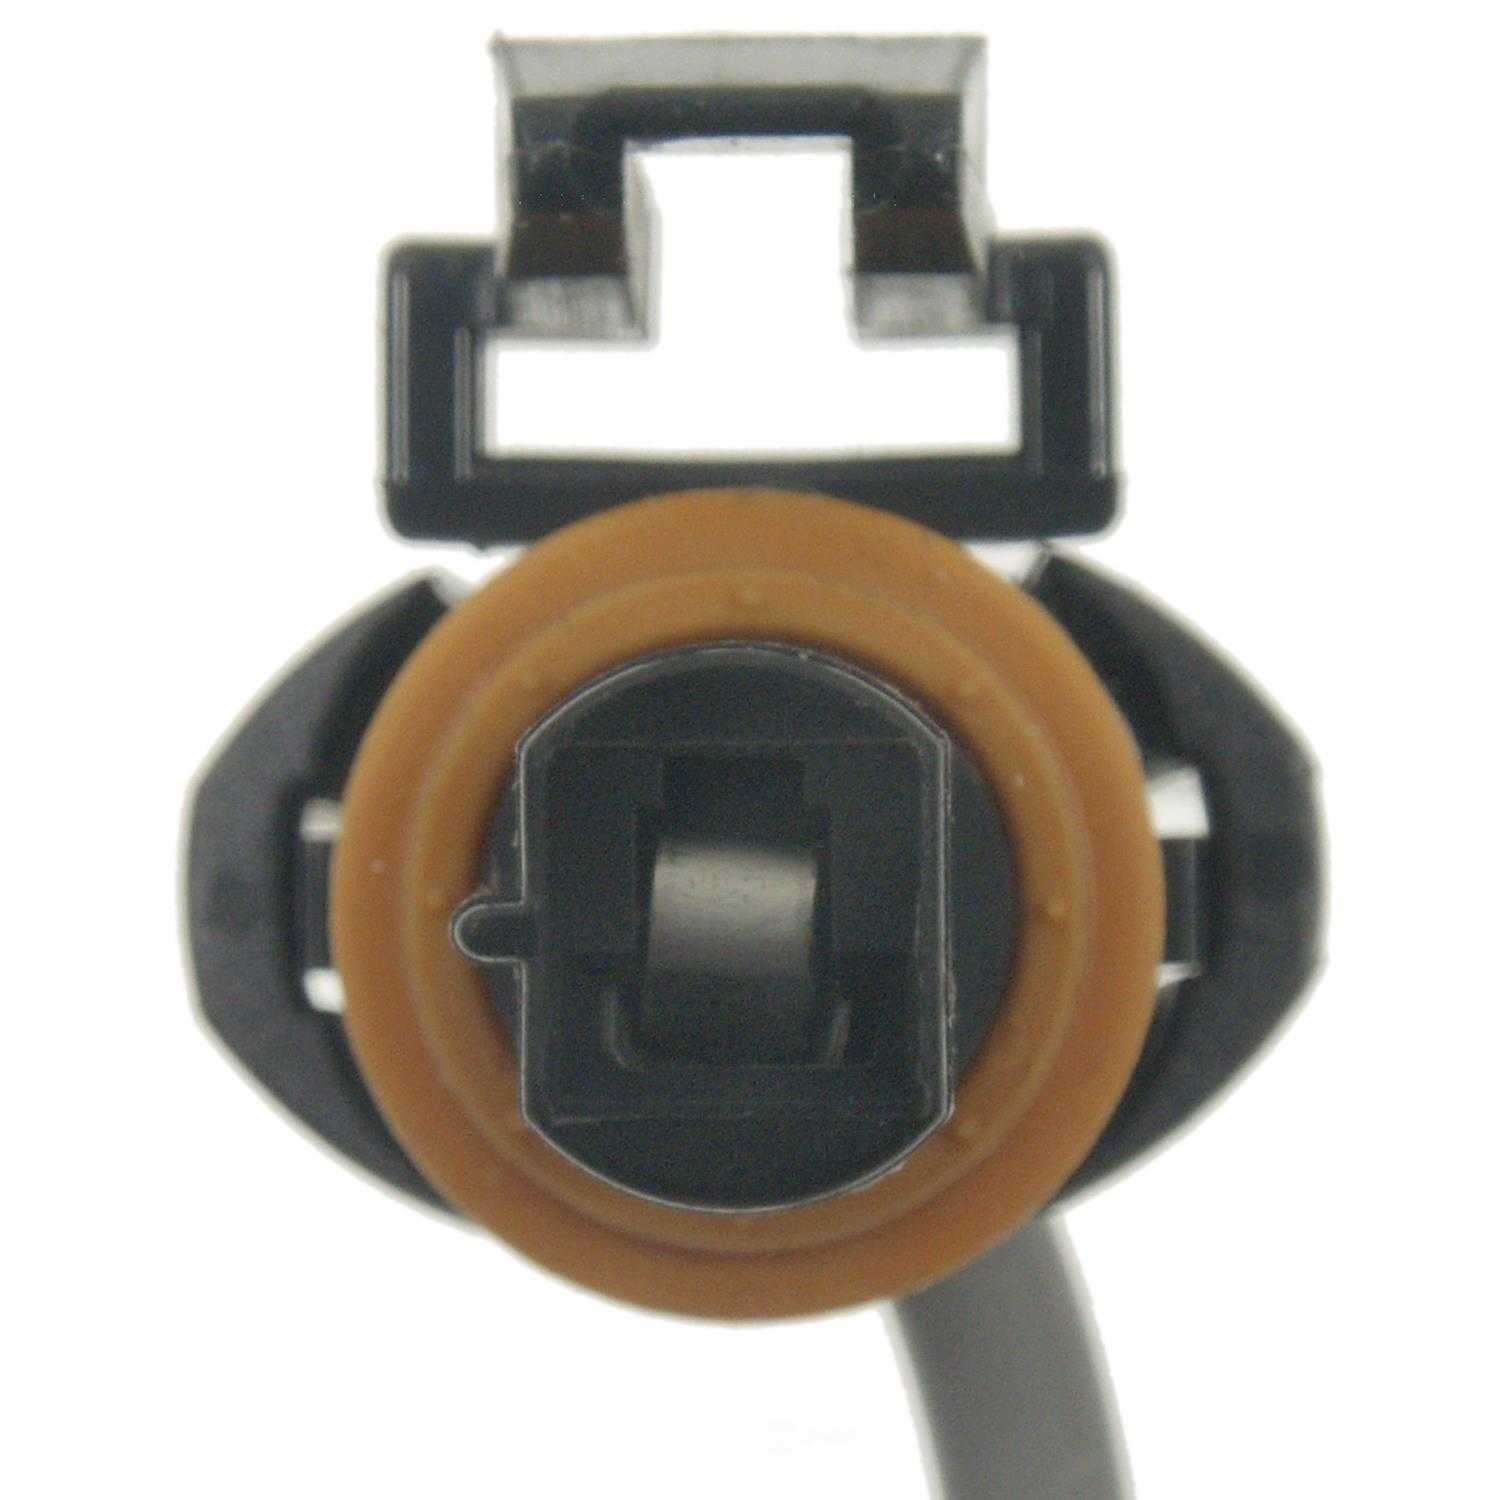 STANDARD MOTOR PRODUCTS - Electric Brake Control Connector - STA S-1029